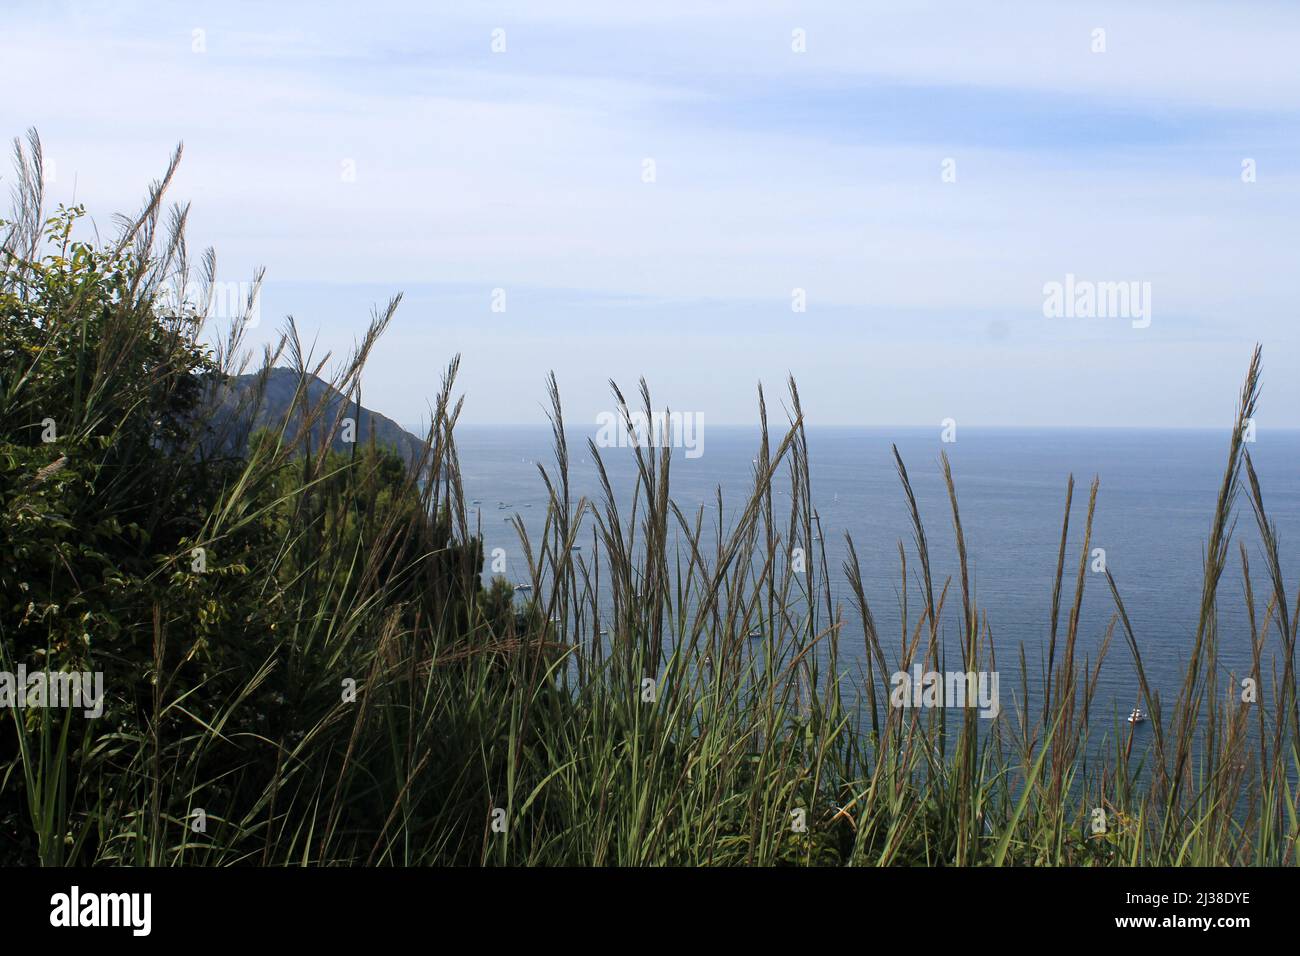 The horizon of the infinite sea behind the grass and the ears in the south of Italy Stock Photo